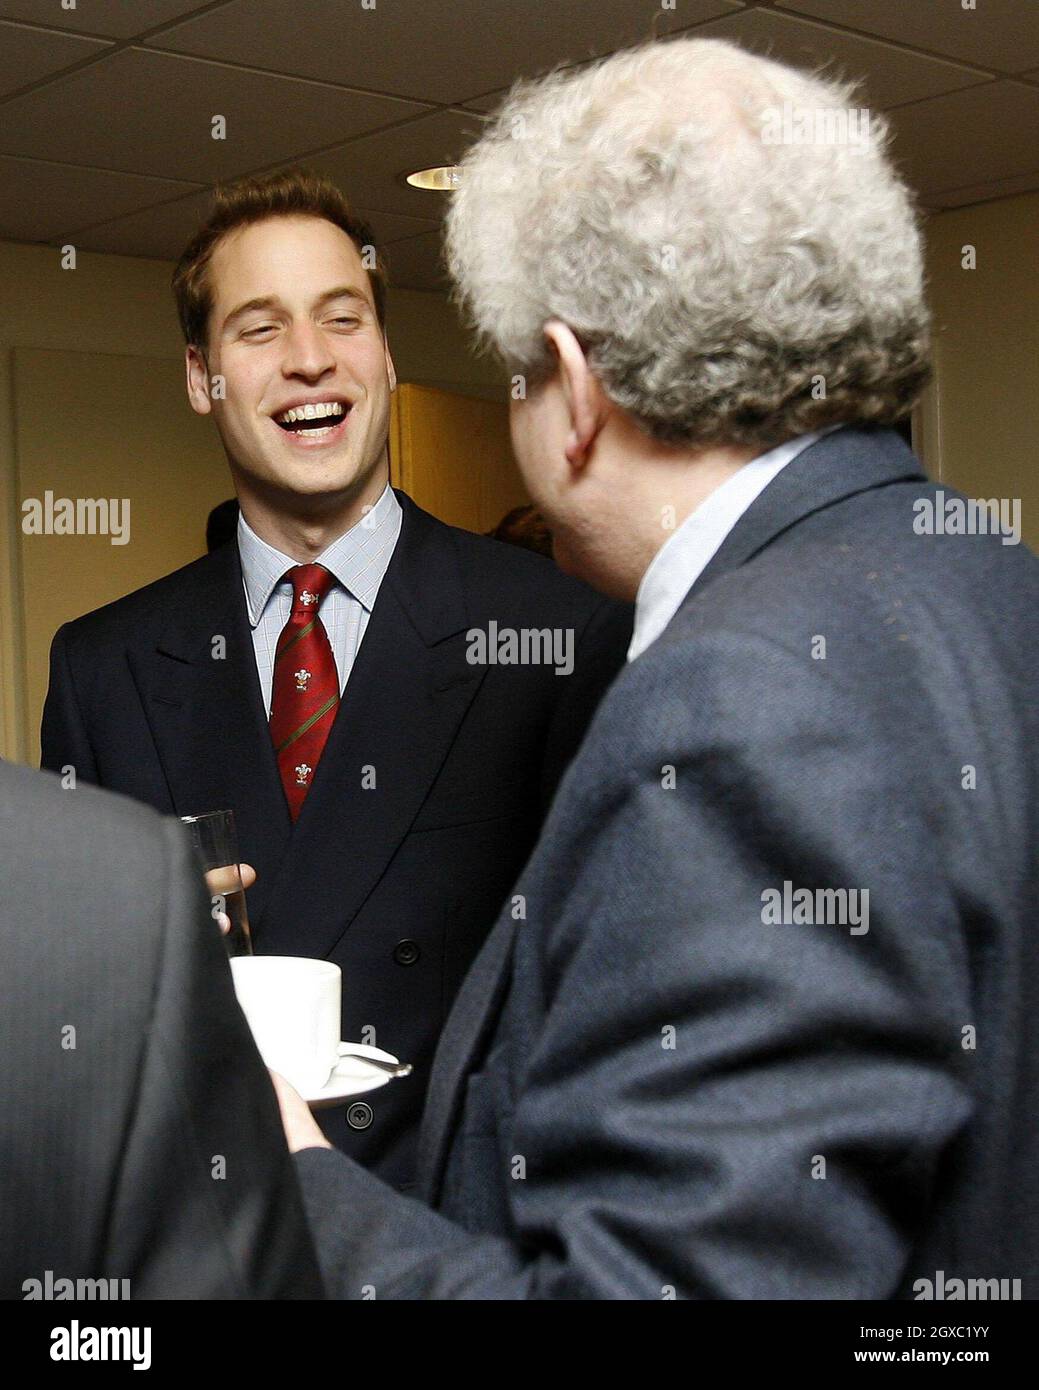 Prince William chats to Wales First Minister Rhodri Morgan at the Millennium Stadium, Cardiff on February 4, 2007. Prince William officially took up his role as Vice Royal Patron of the Welsh Rugby Union. The prince was at the Millennium Stadium in Cardiff to see Wales play Ireland in their opening game of the Six Nations tournament. Anwar Hussein/EMPICS Entertainment Stock Photo